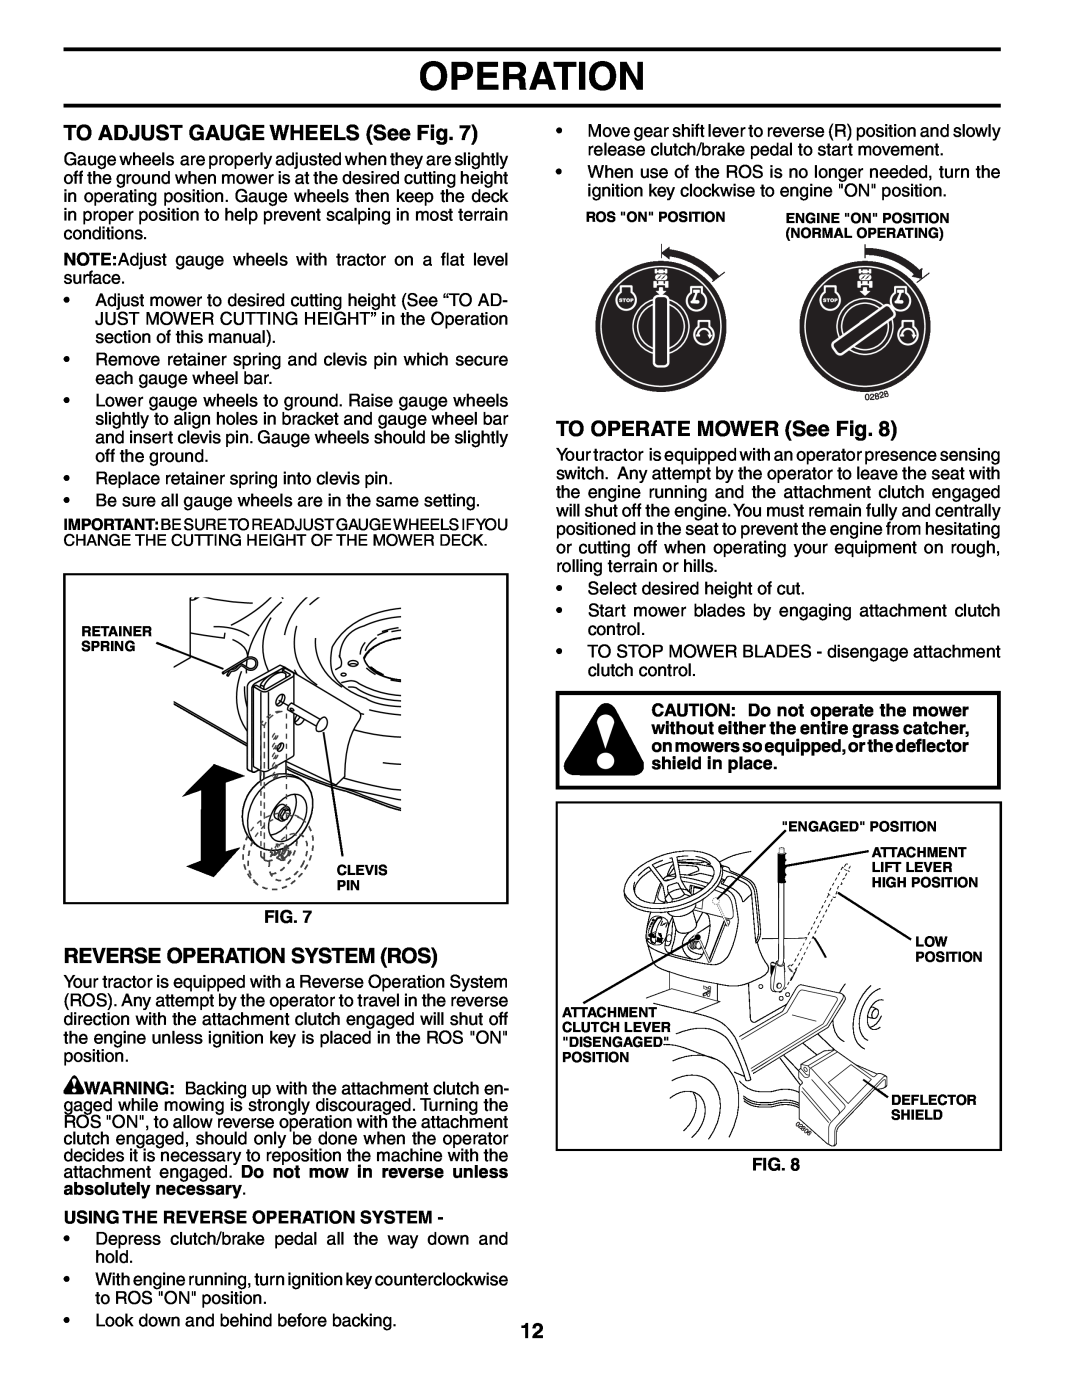 Poulan PK1942YT manual TO ADJUST GAUGE WHEELS See Fig, Reverse Operation System Ros, TO OPERATE MOWER See Fig 